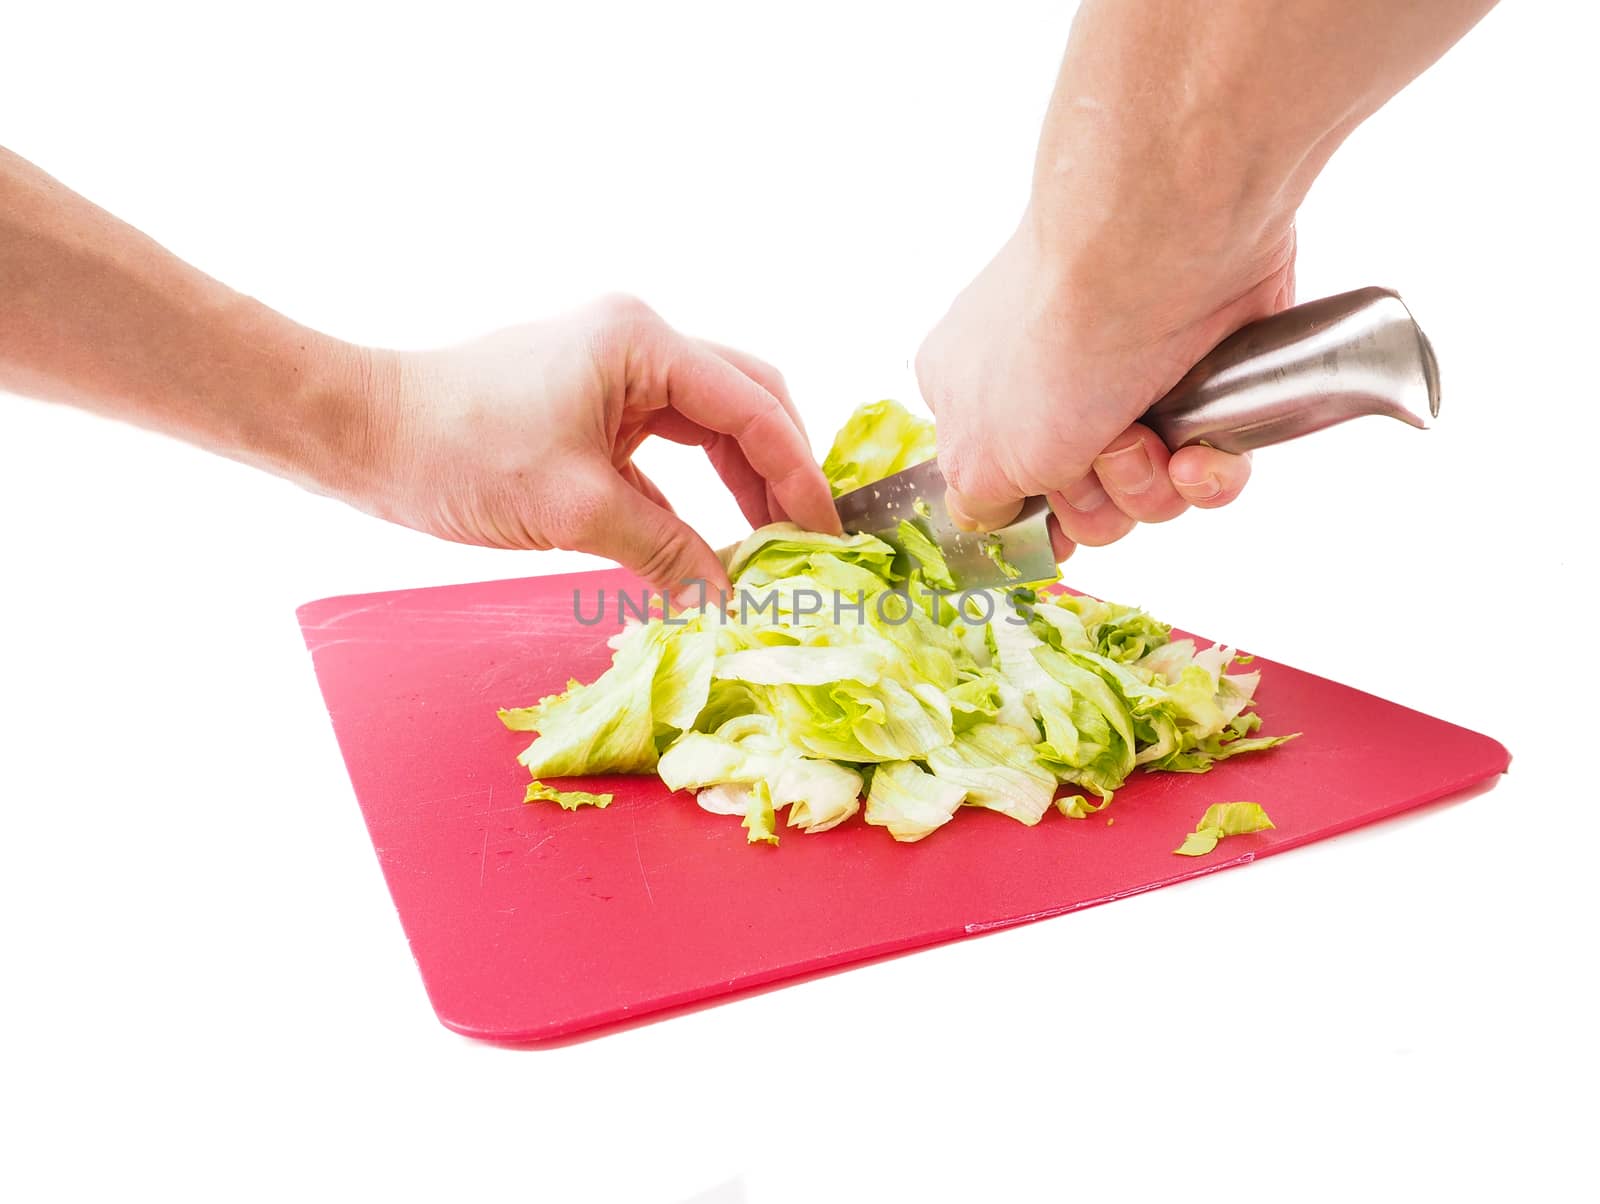 Hands cutting fresh green lettuce salad with grey metal knife on red plastic cutting board towards white